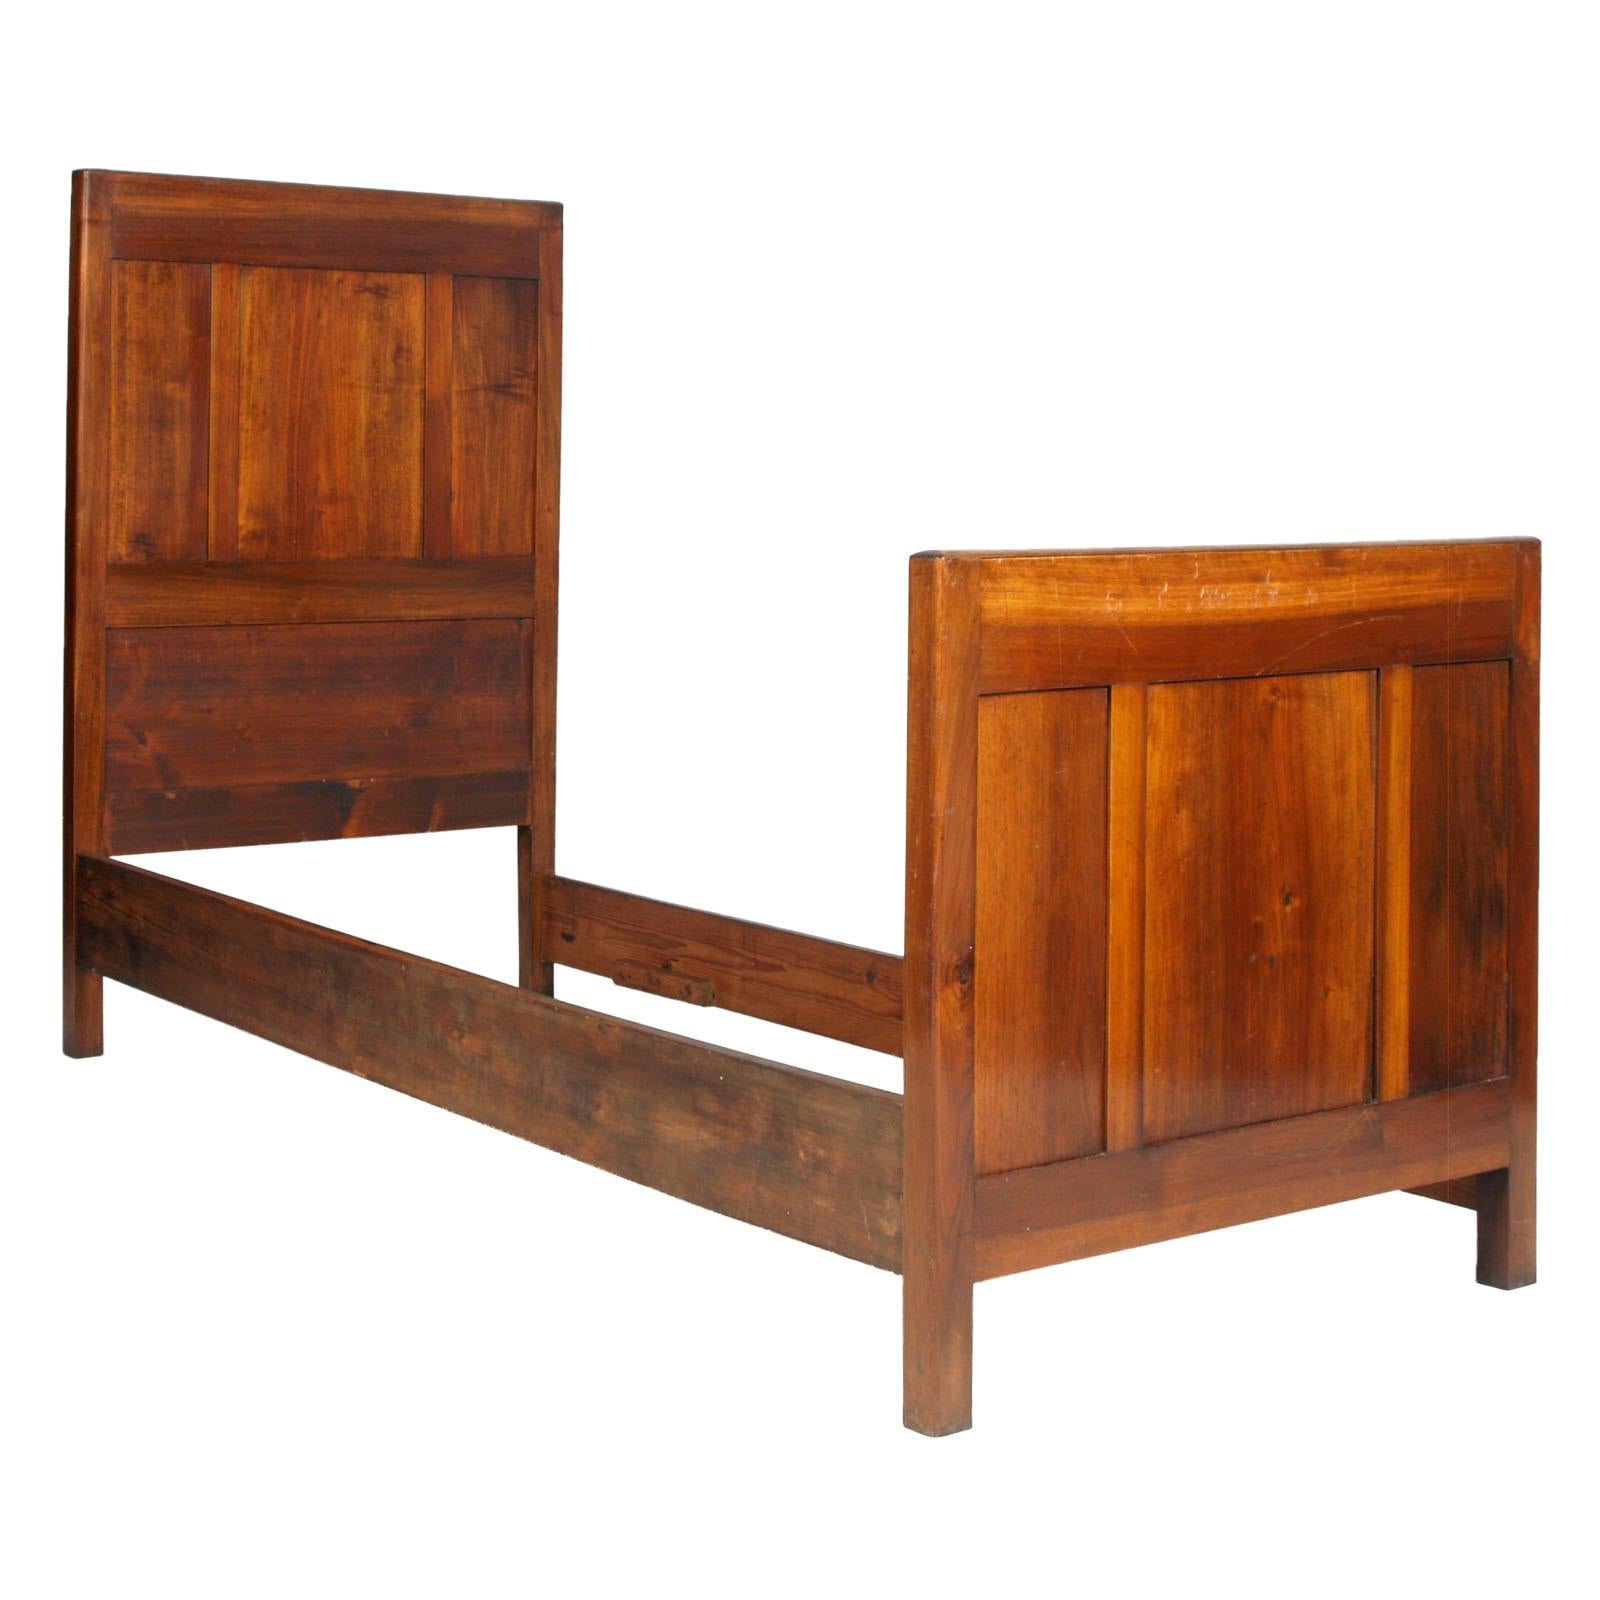 1930 Country Twin Beds in Solid Cherry Wood, Art Deco Period, Wax Polished In Good Condition In Vigonza, Padua